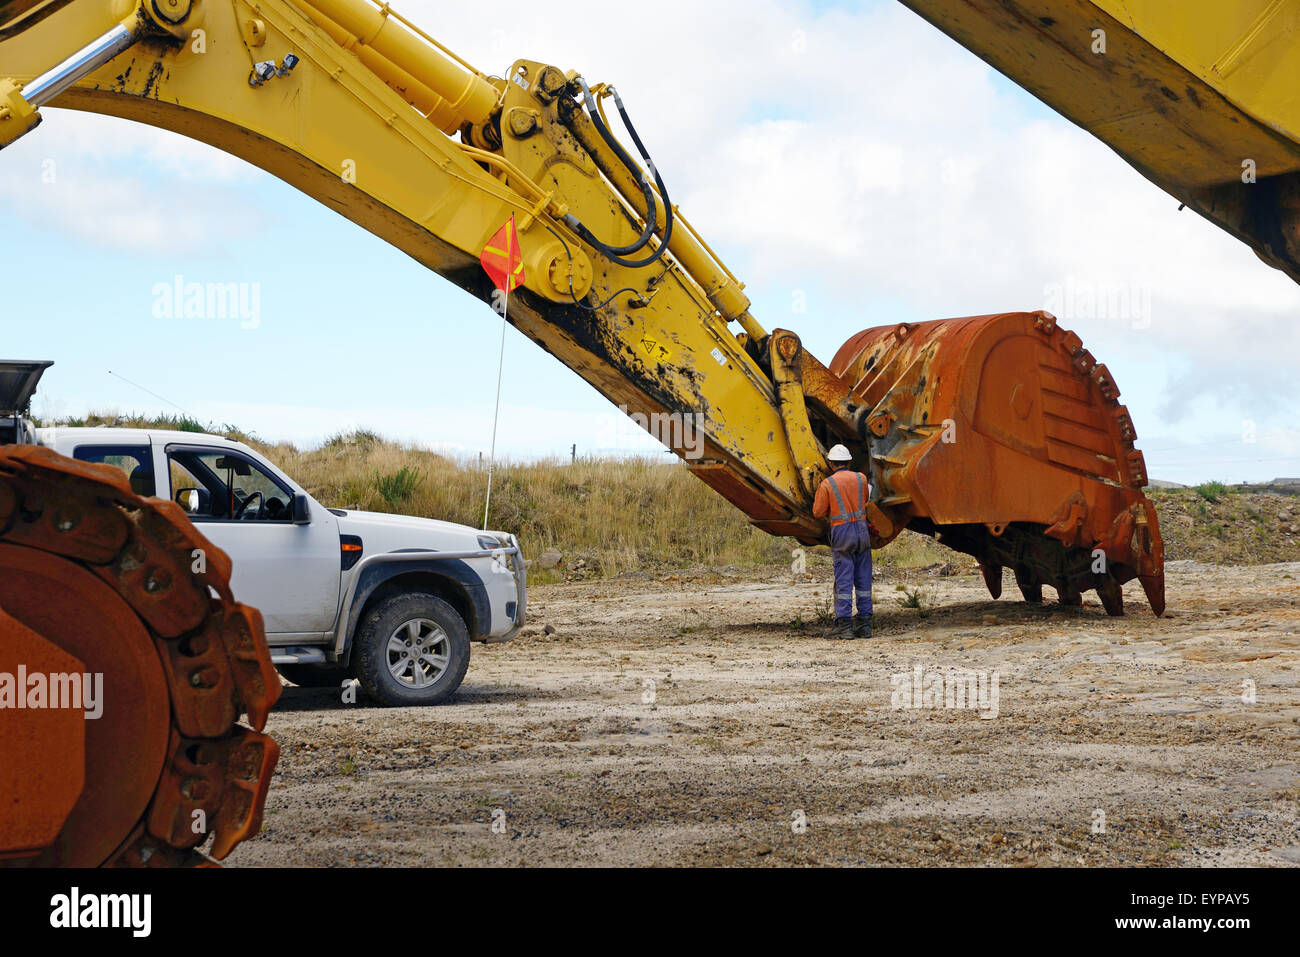 A mechanic services the bucket of a 200 ton digger at open cast coal mine Photo - Alamy